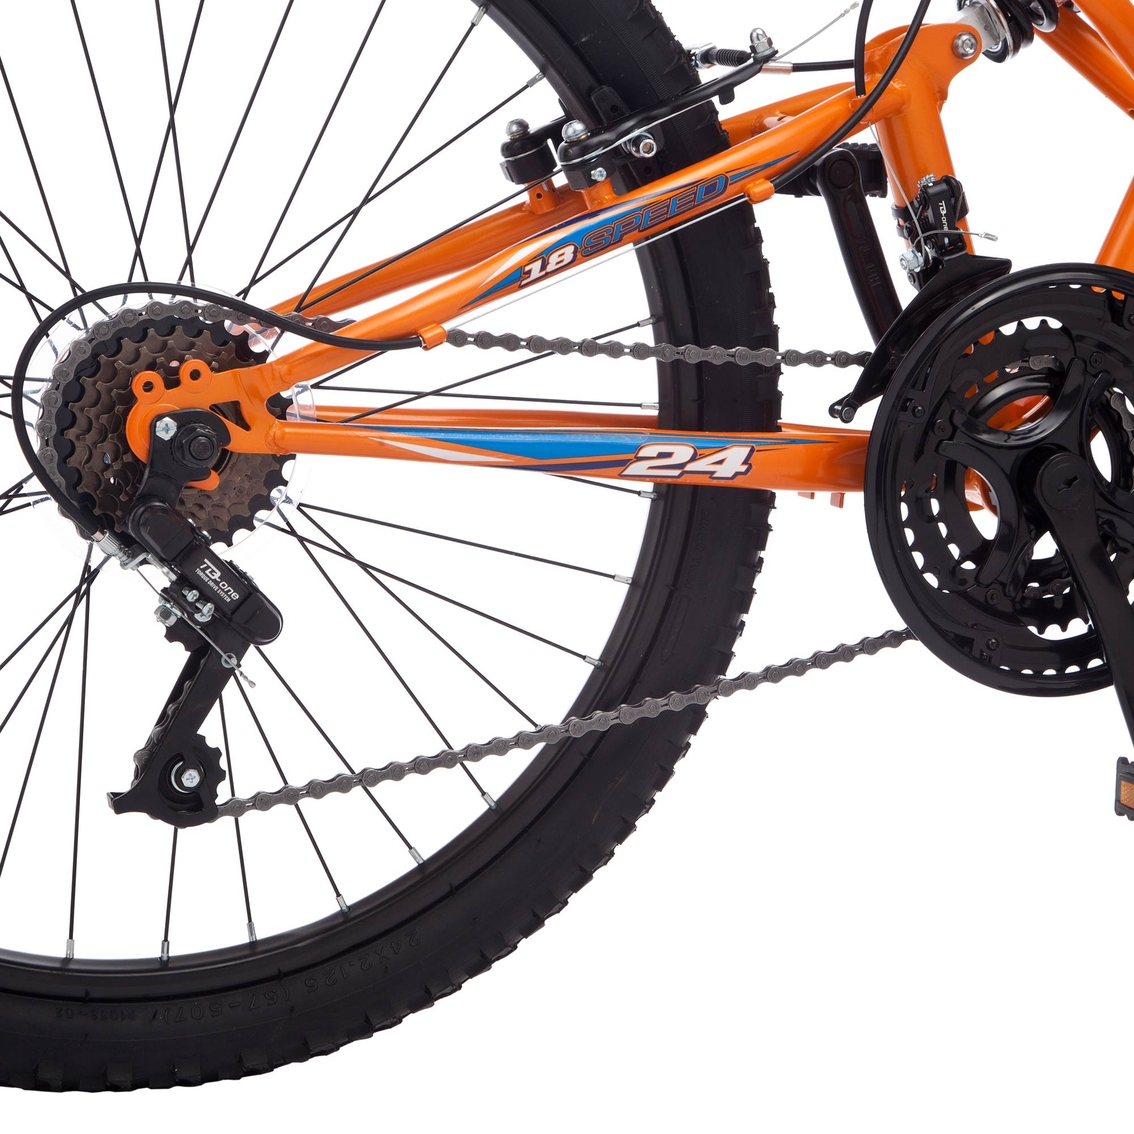 Pacific Derby Boys 24 In. Full Suspension Mountain Bike - Image 3 of 4